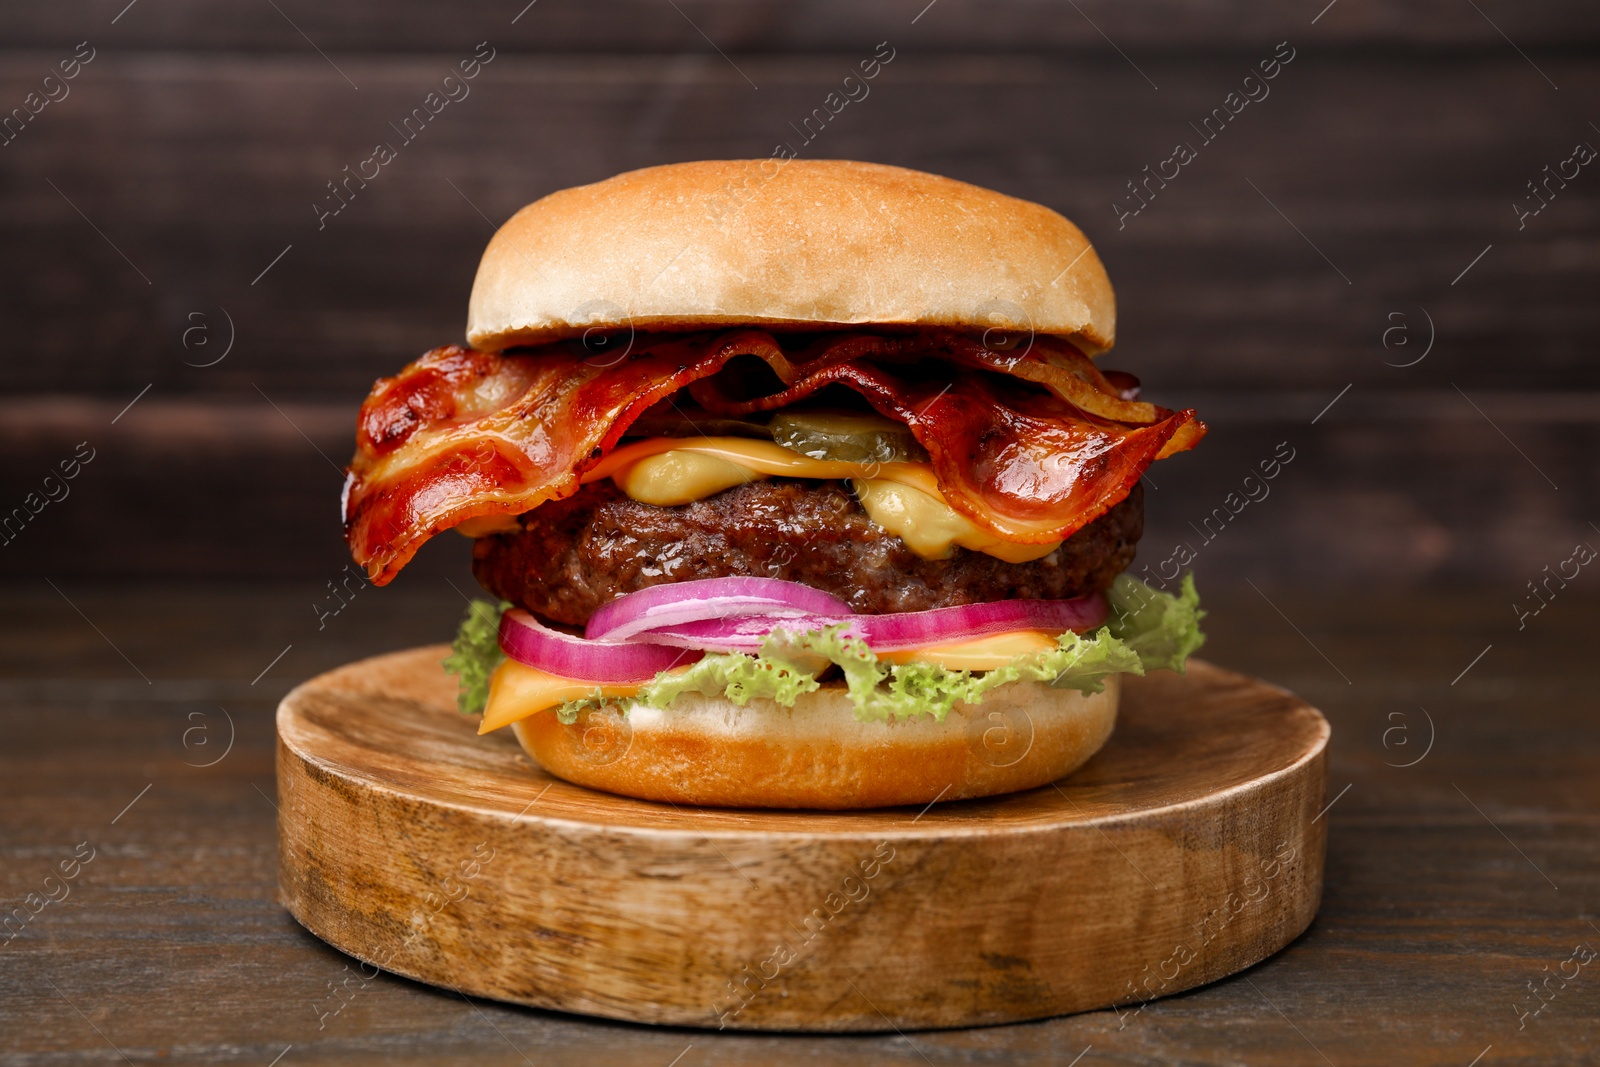 Photo of Tasty burger with bacon, vegetables and patty on wooden table